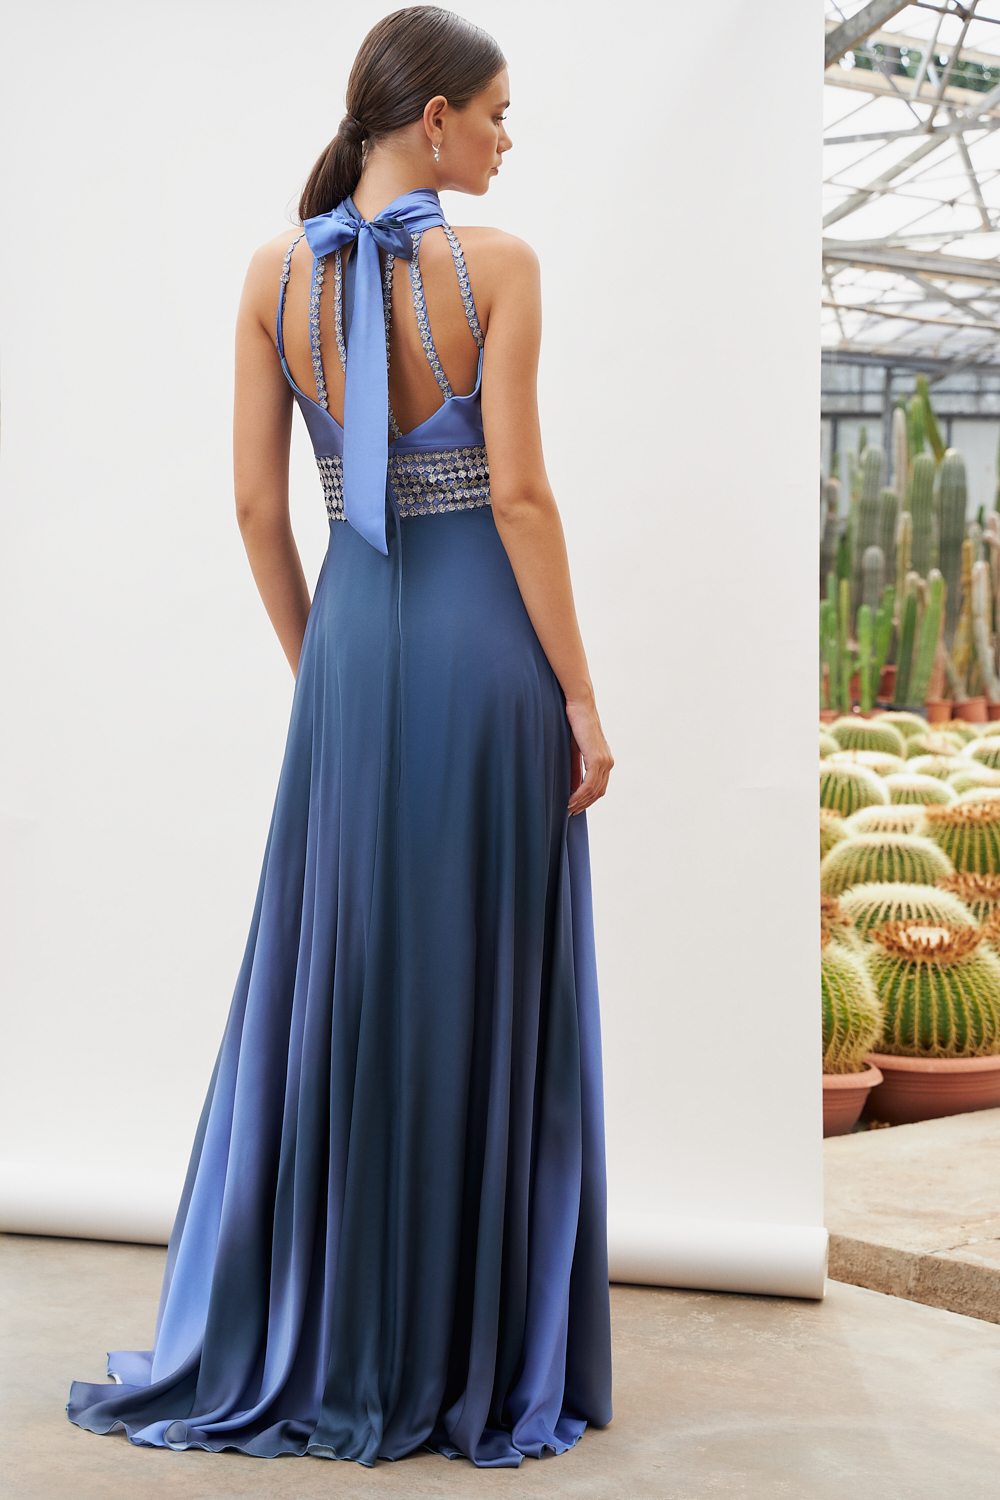 Cocktail Dresses / Long cocktail satin dress with beading at the waist and open back